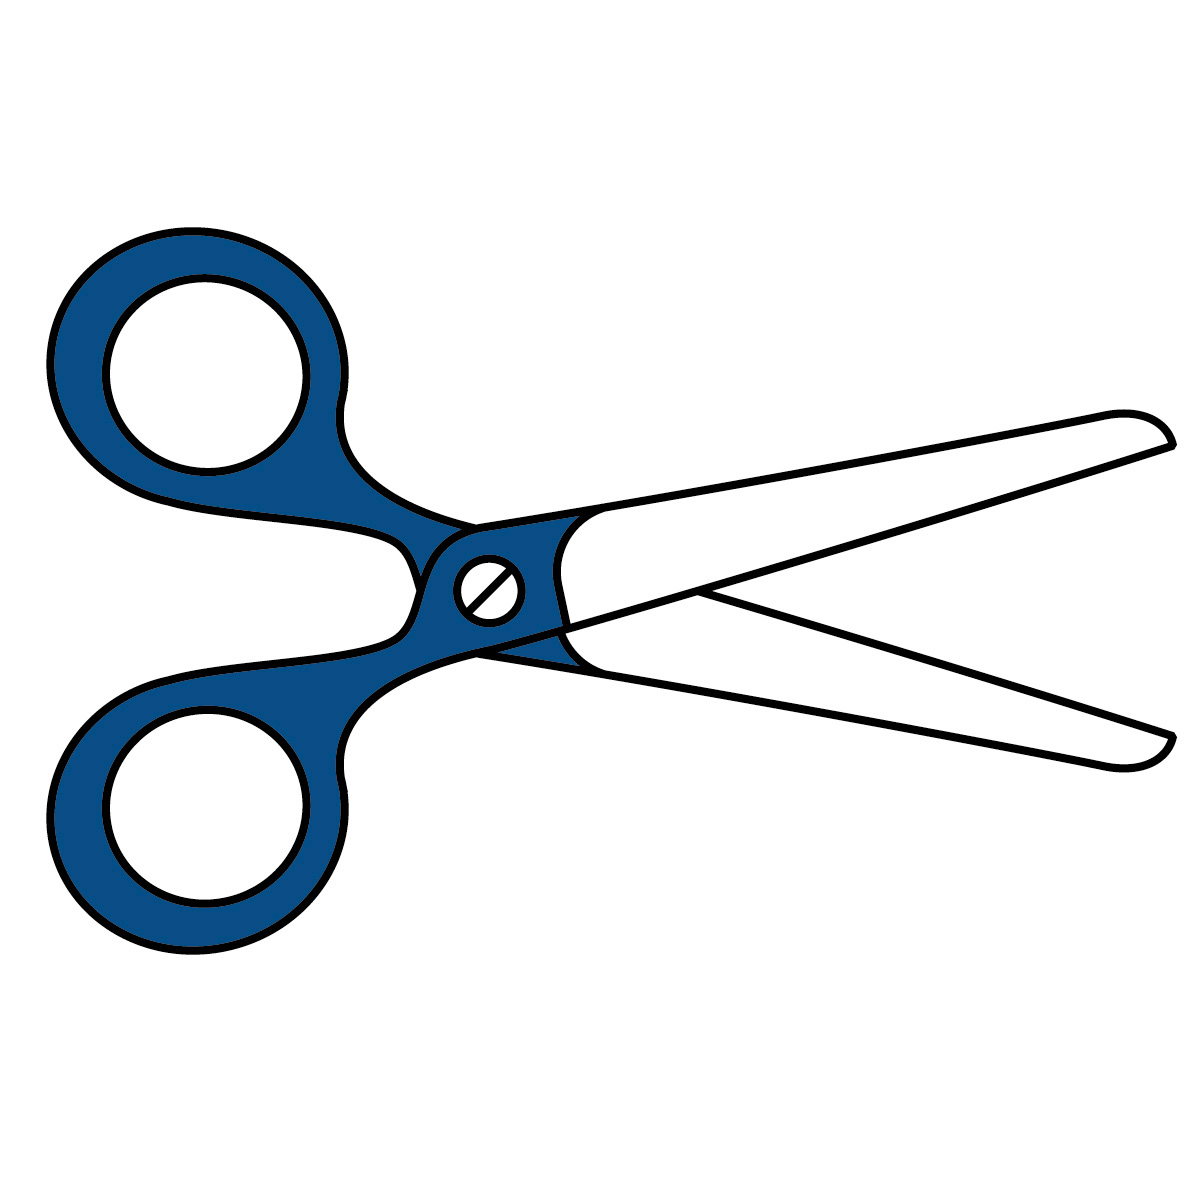 Scissors clipart black and white free images 2